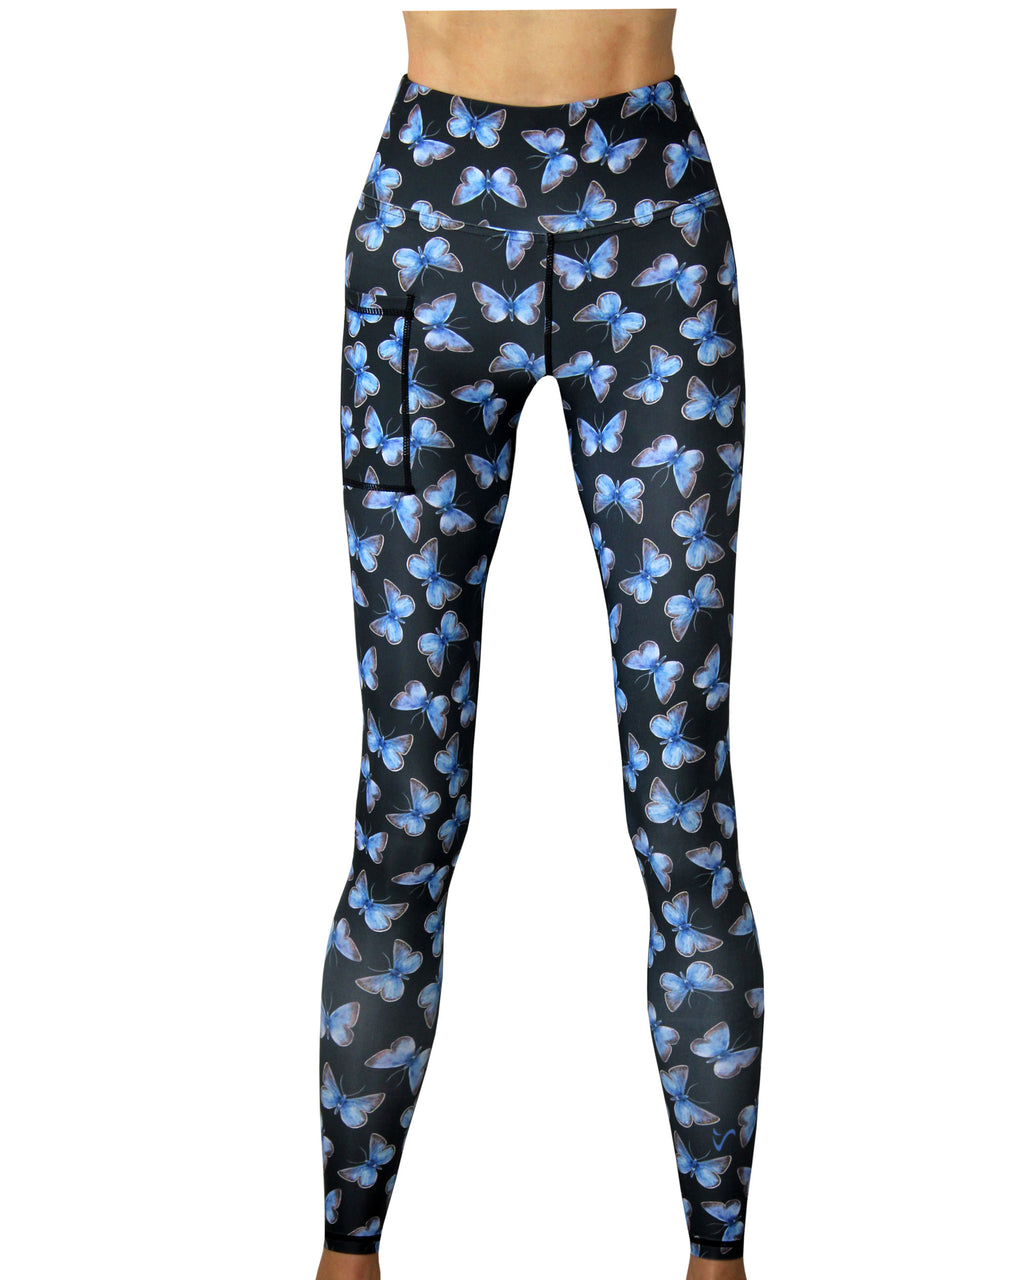 Black leggings with blue butterflies.  Unique sportswear with beautiful and funky designs.